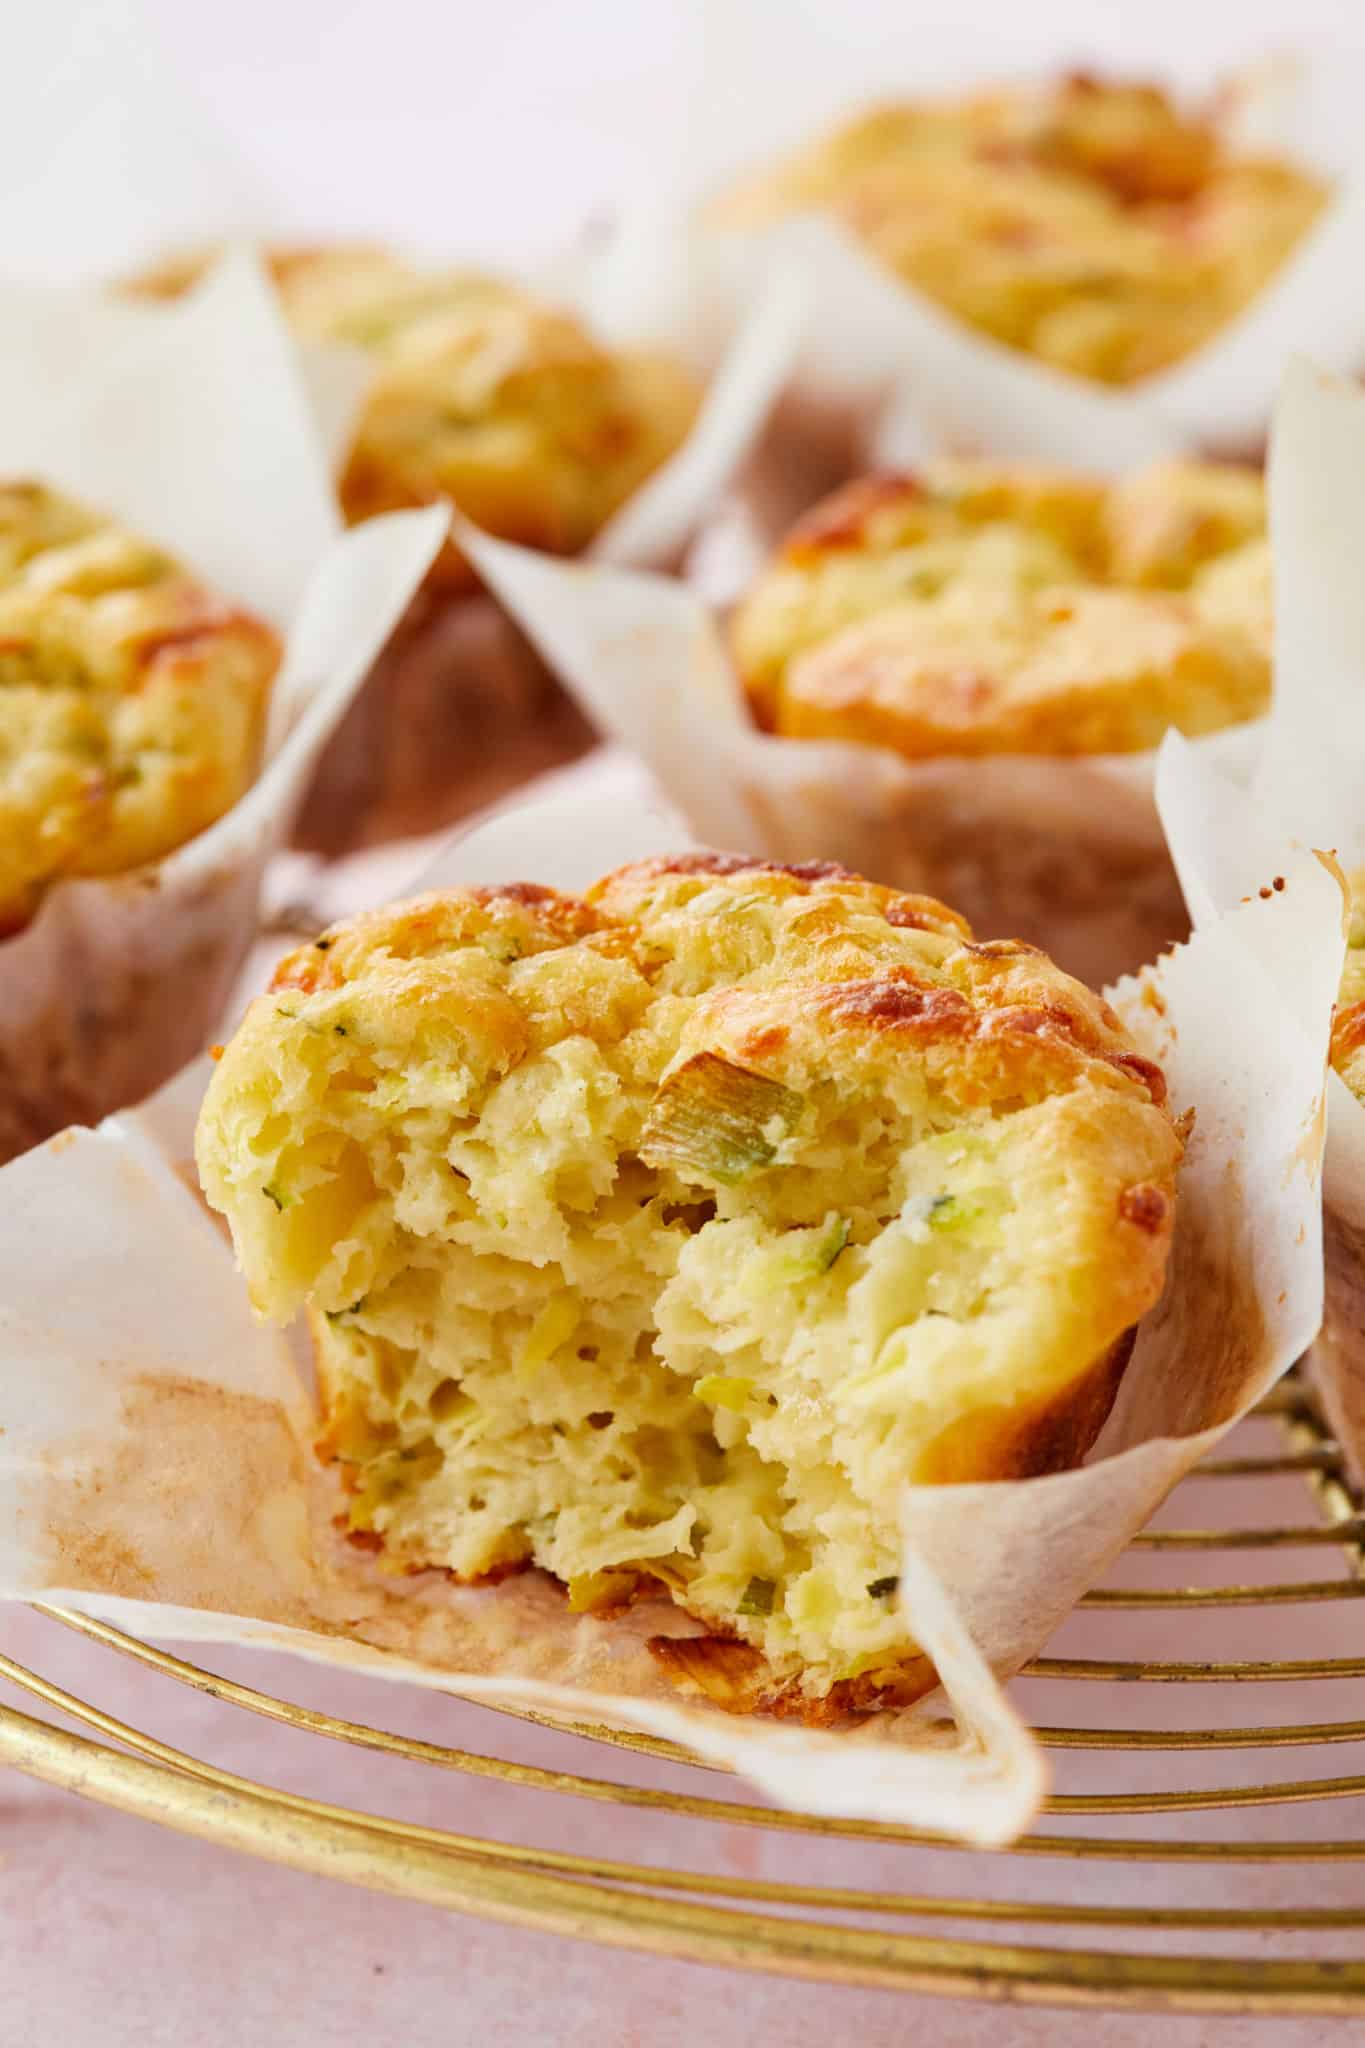 The interior of a Zucchini and Cheese Muffin